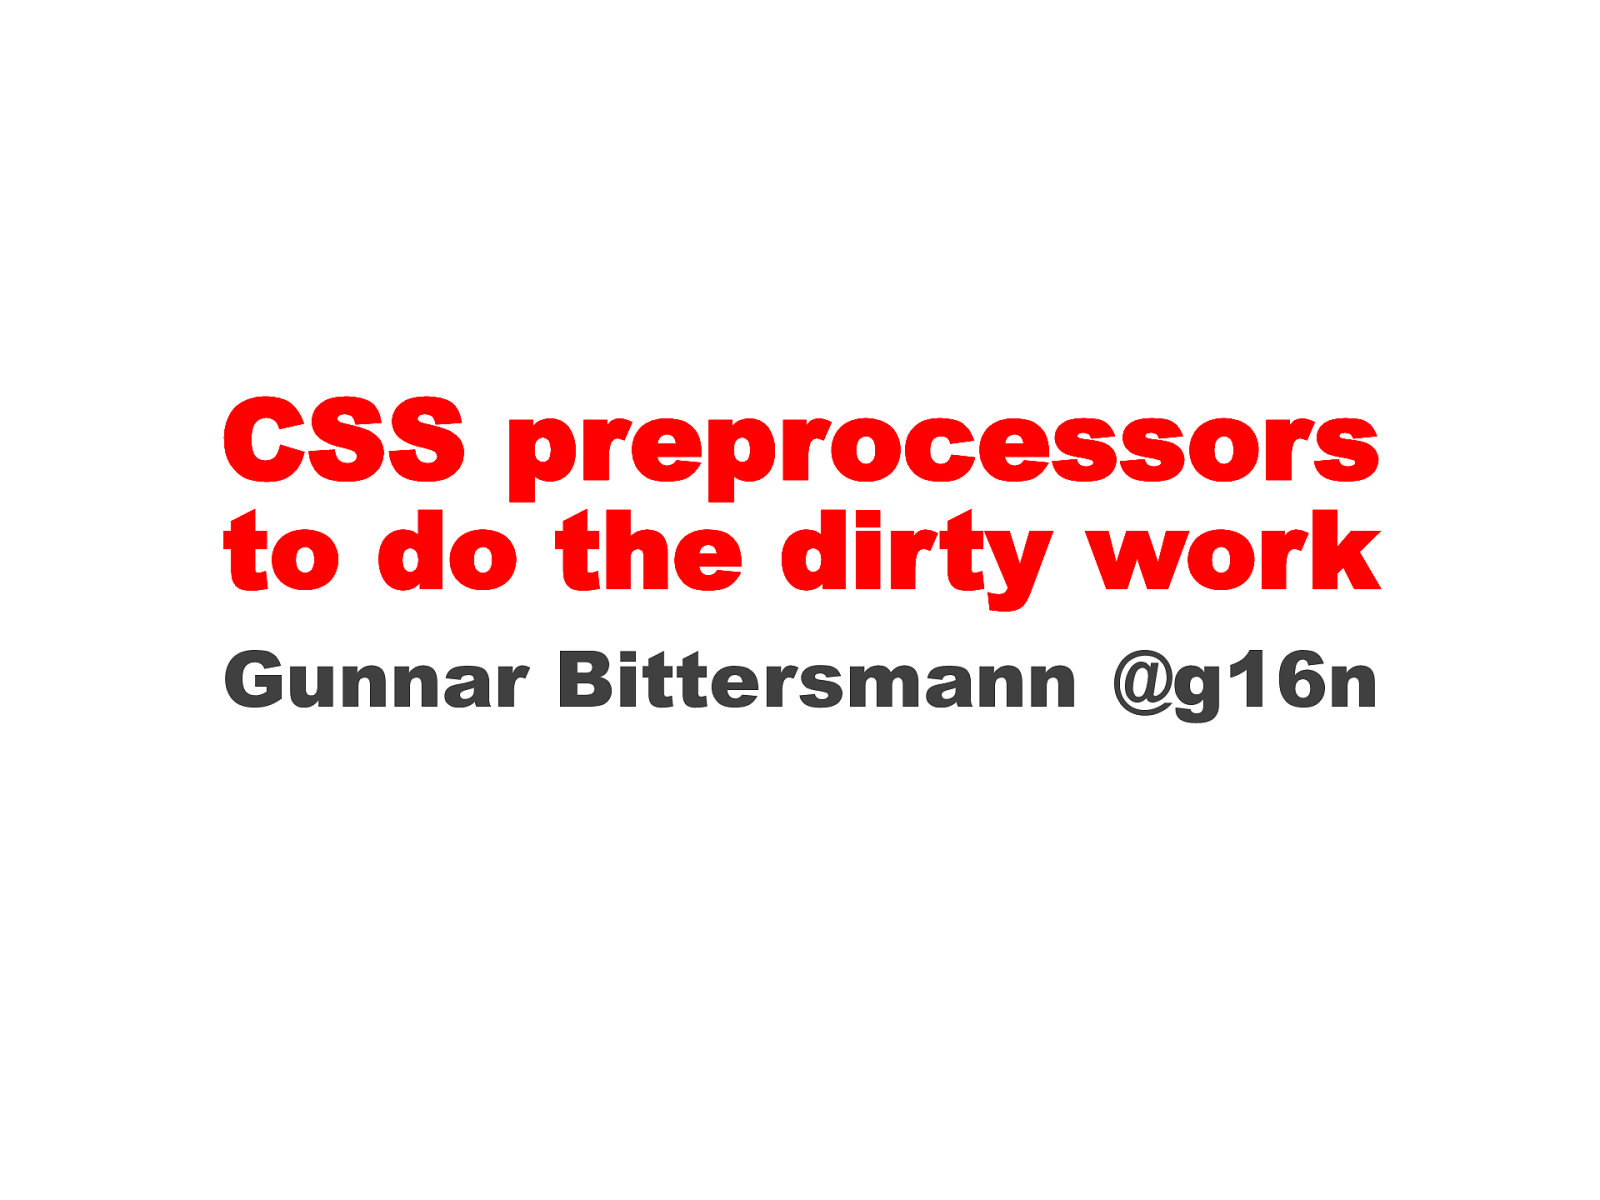 CSS preprocessors to do the dirty work